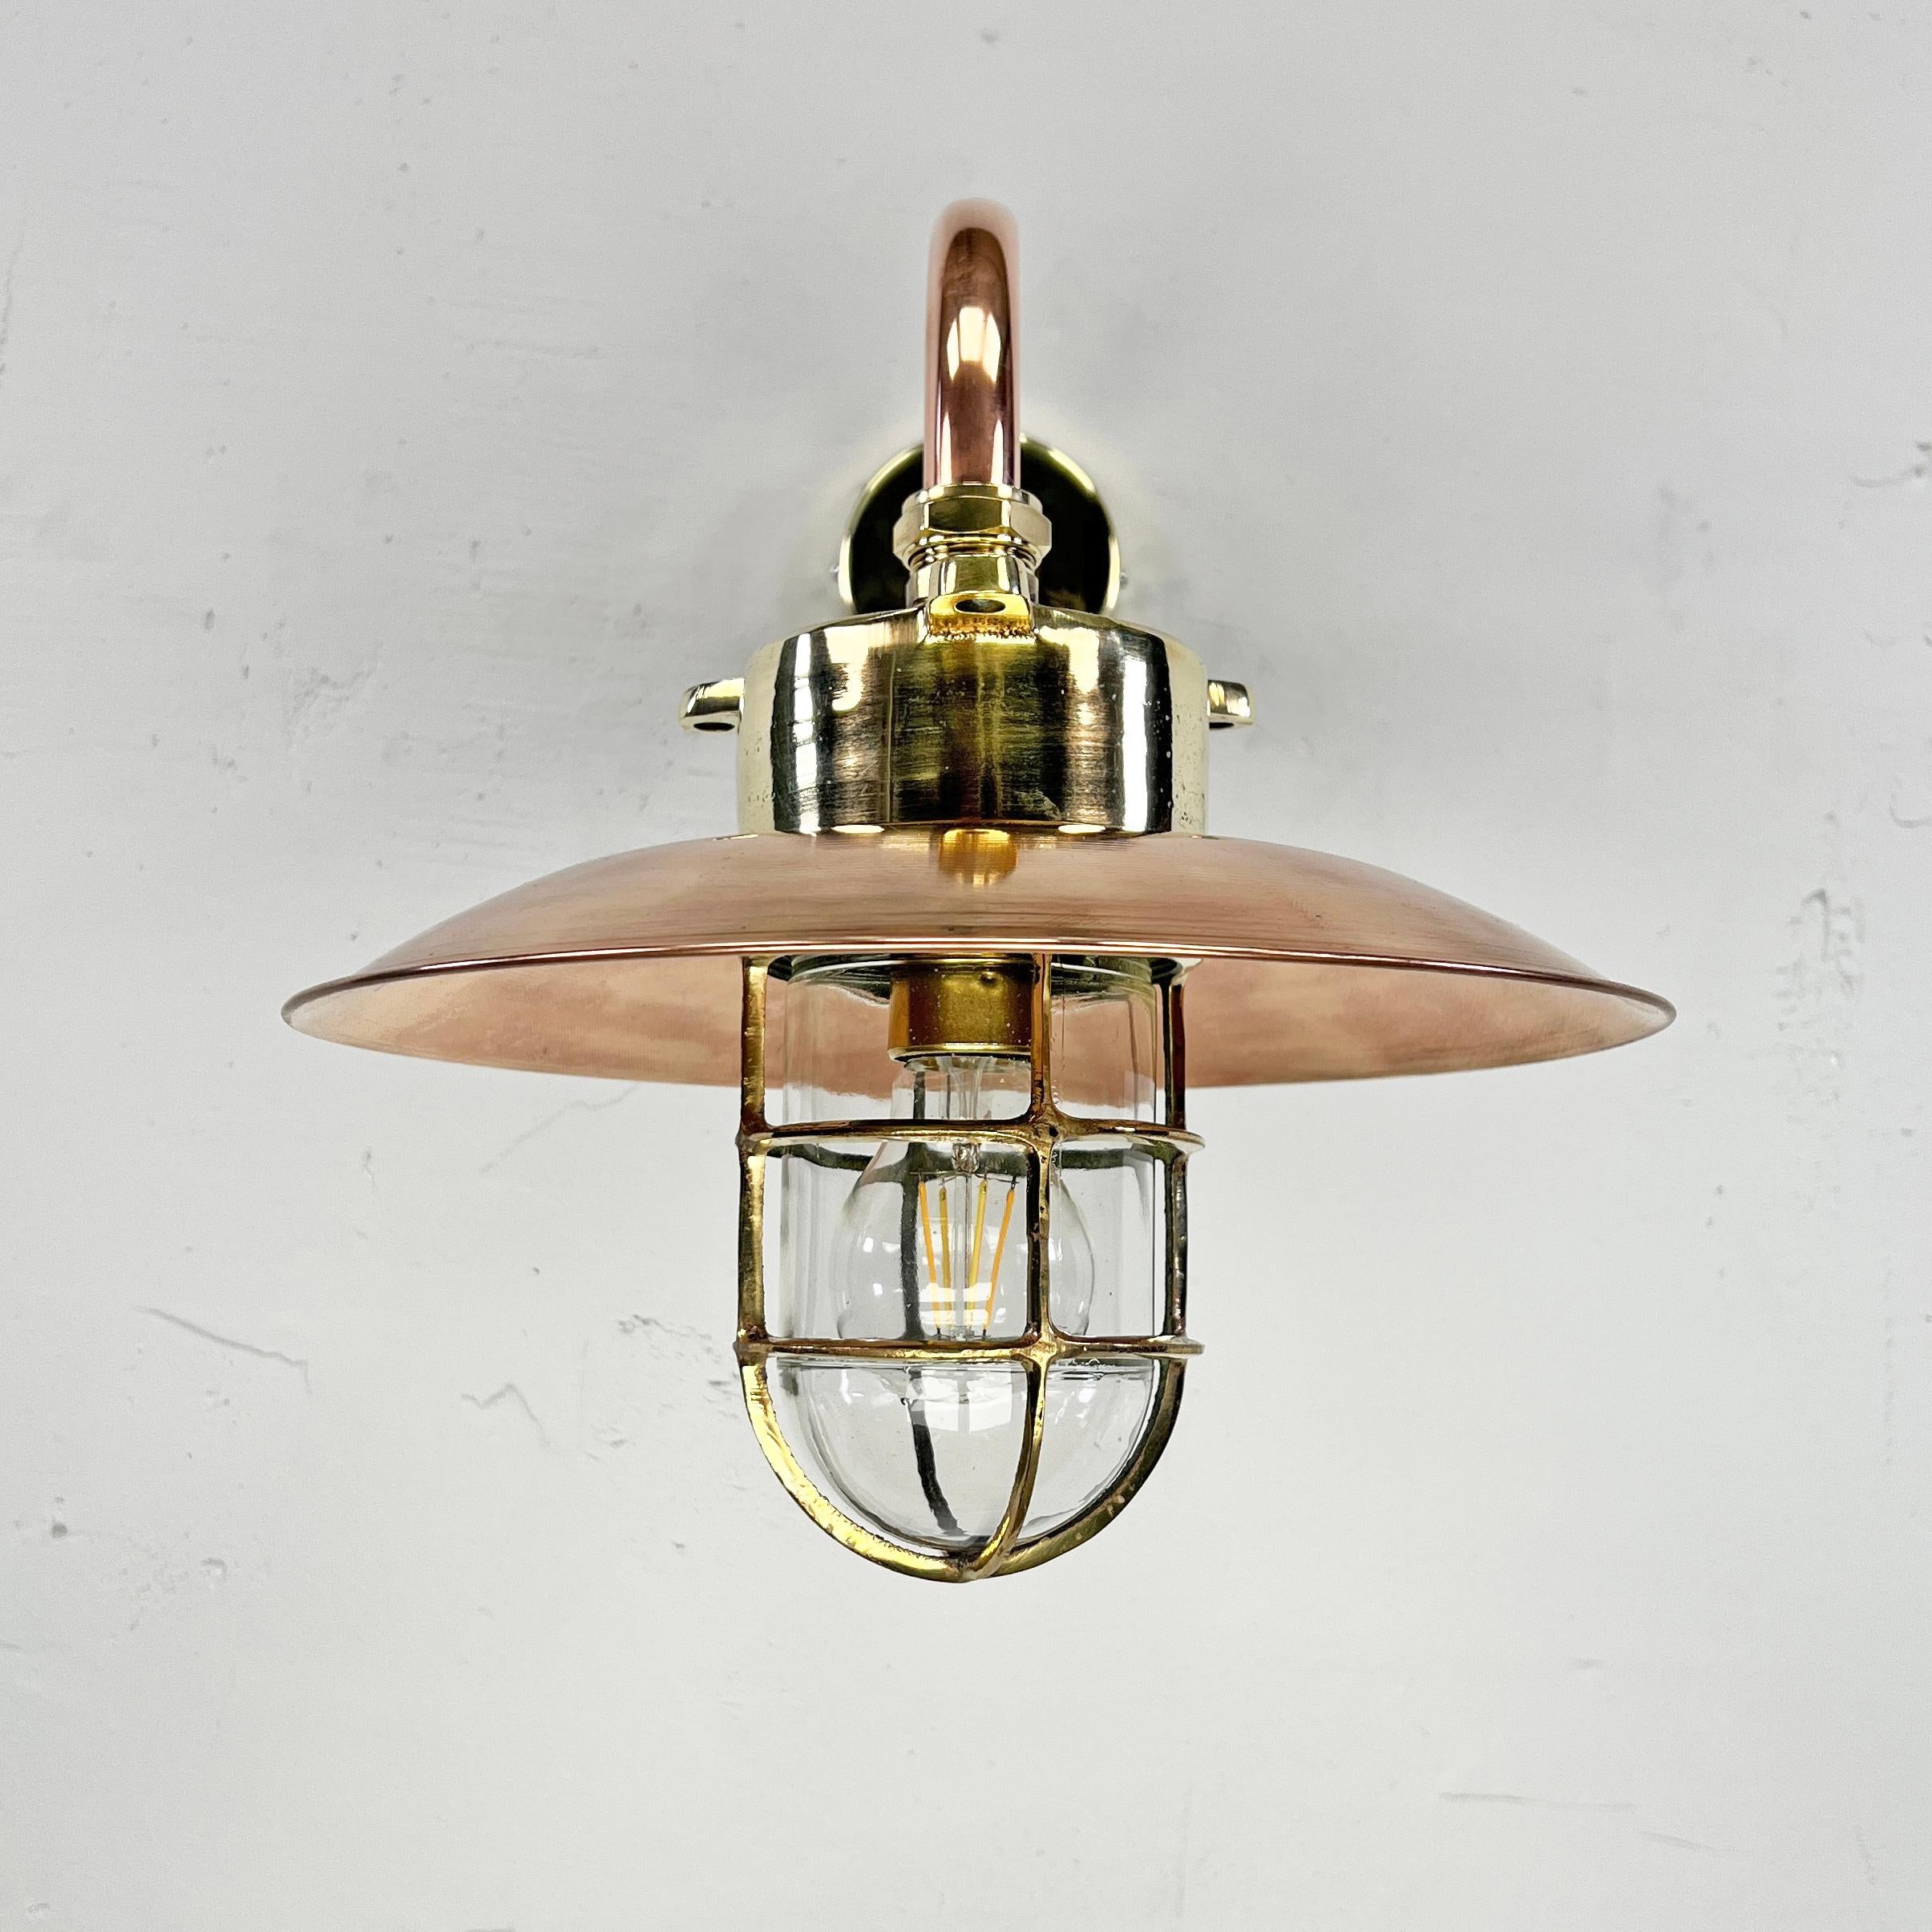 Late 20th Century 1970s Japanese Cast Brass and Copper Explosion Proof Caged Cantilever Wall Light For Sale